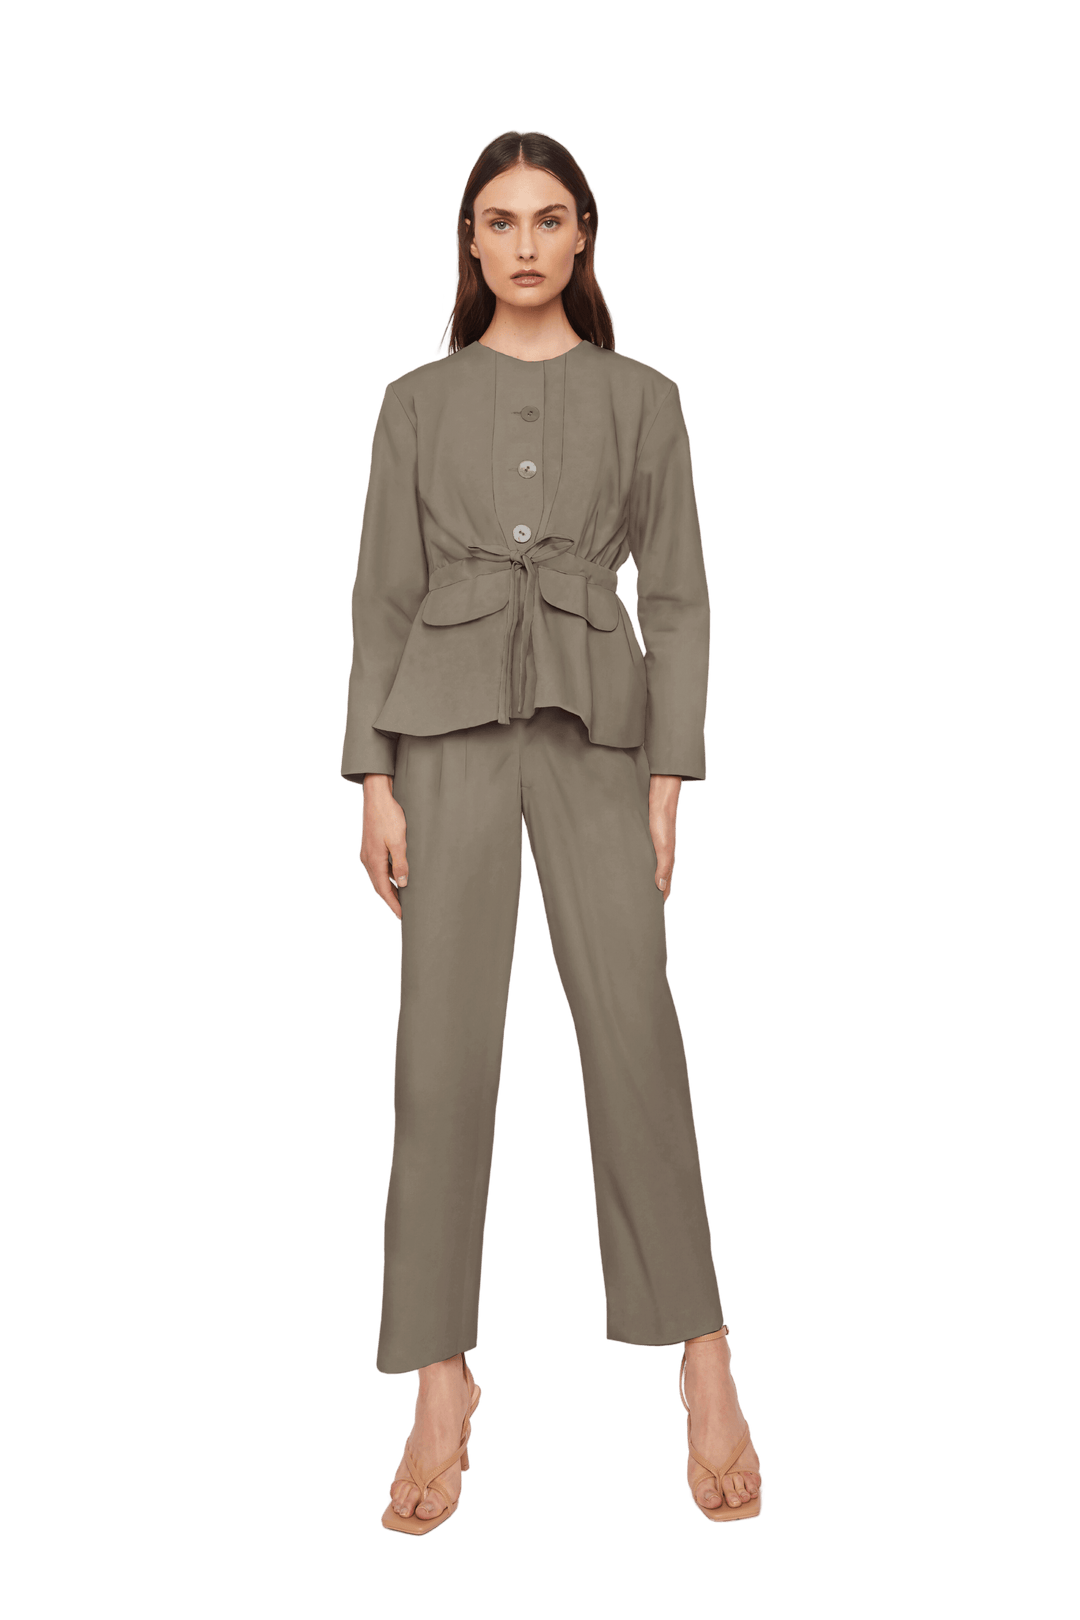 High-Waisted Chino Trousers with Drawstring Waist in Stratton Khaki Solid Organic Cotton Twill - STEF MOUCHIE